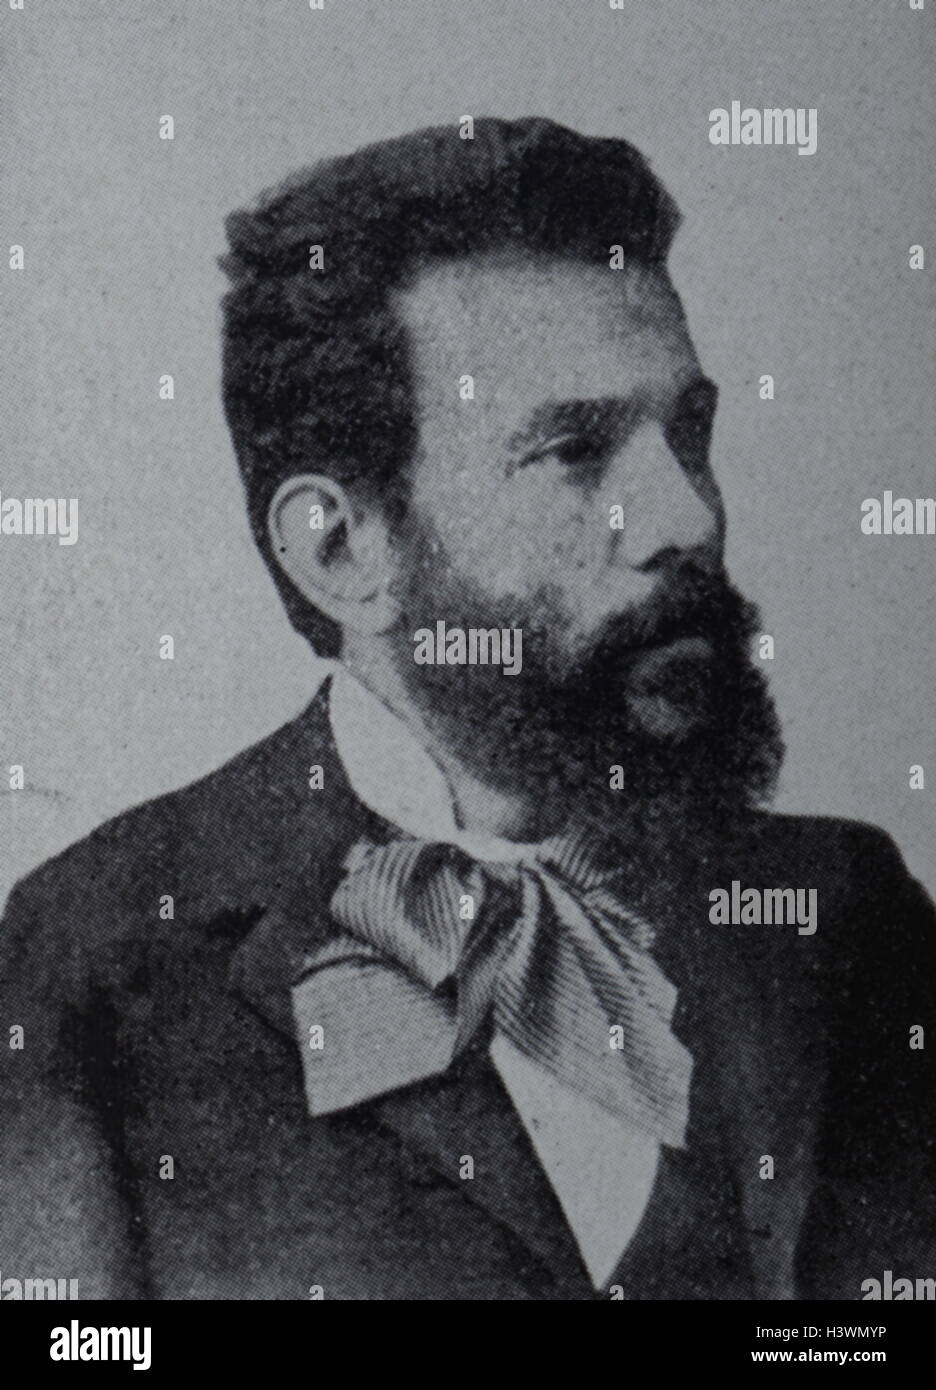 Photograph of Amadeo Vives (1871-1932) a Spanish musical composer. Dated 20th Century Stock Photo